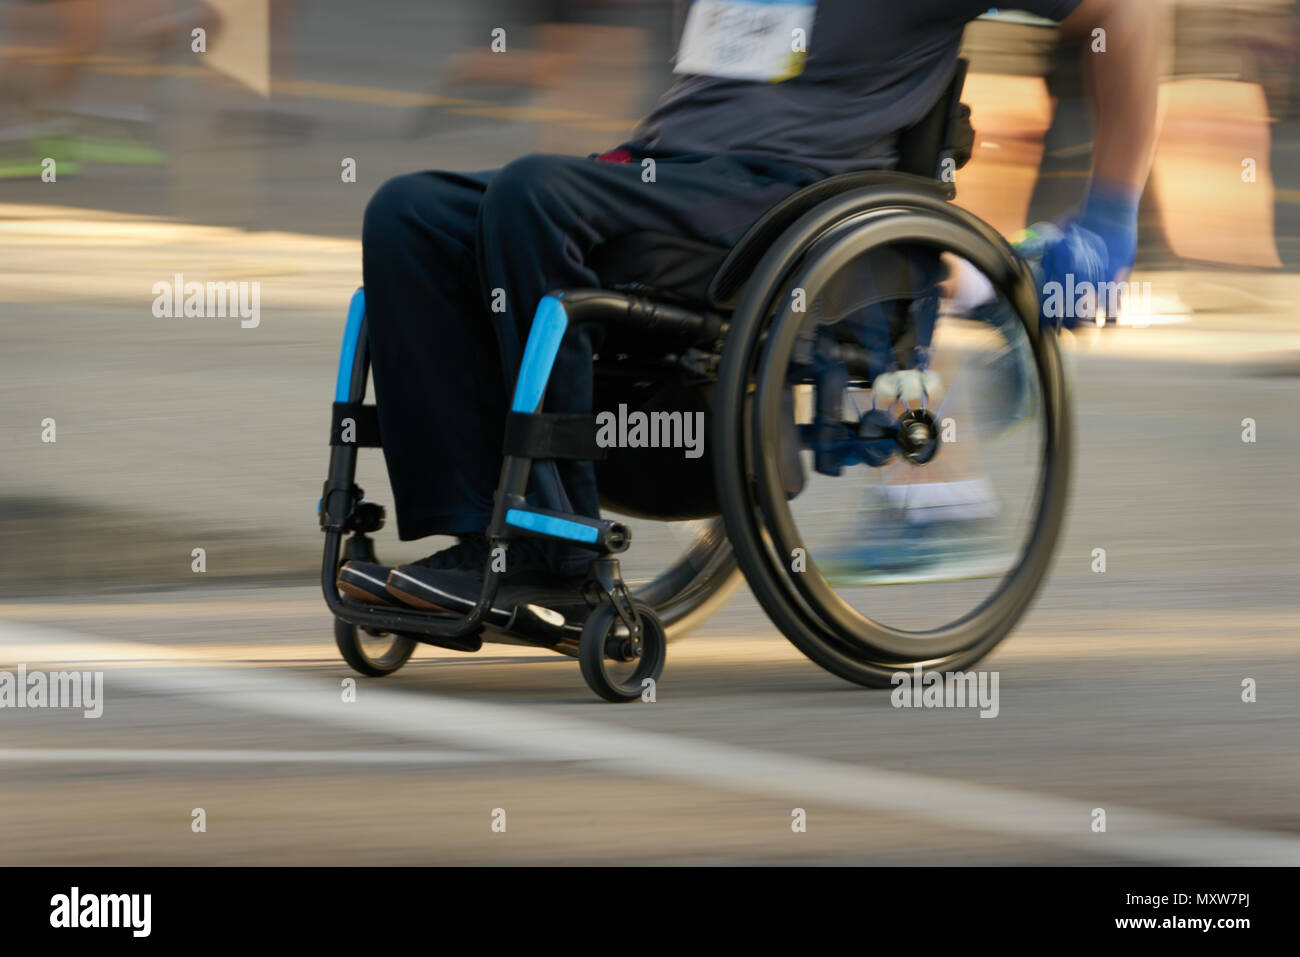 Racing in a Wheelchair  Competitor using a wheelchair in a race. Motion blur. Stock Photo